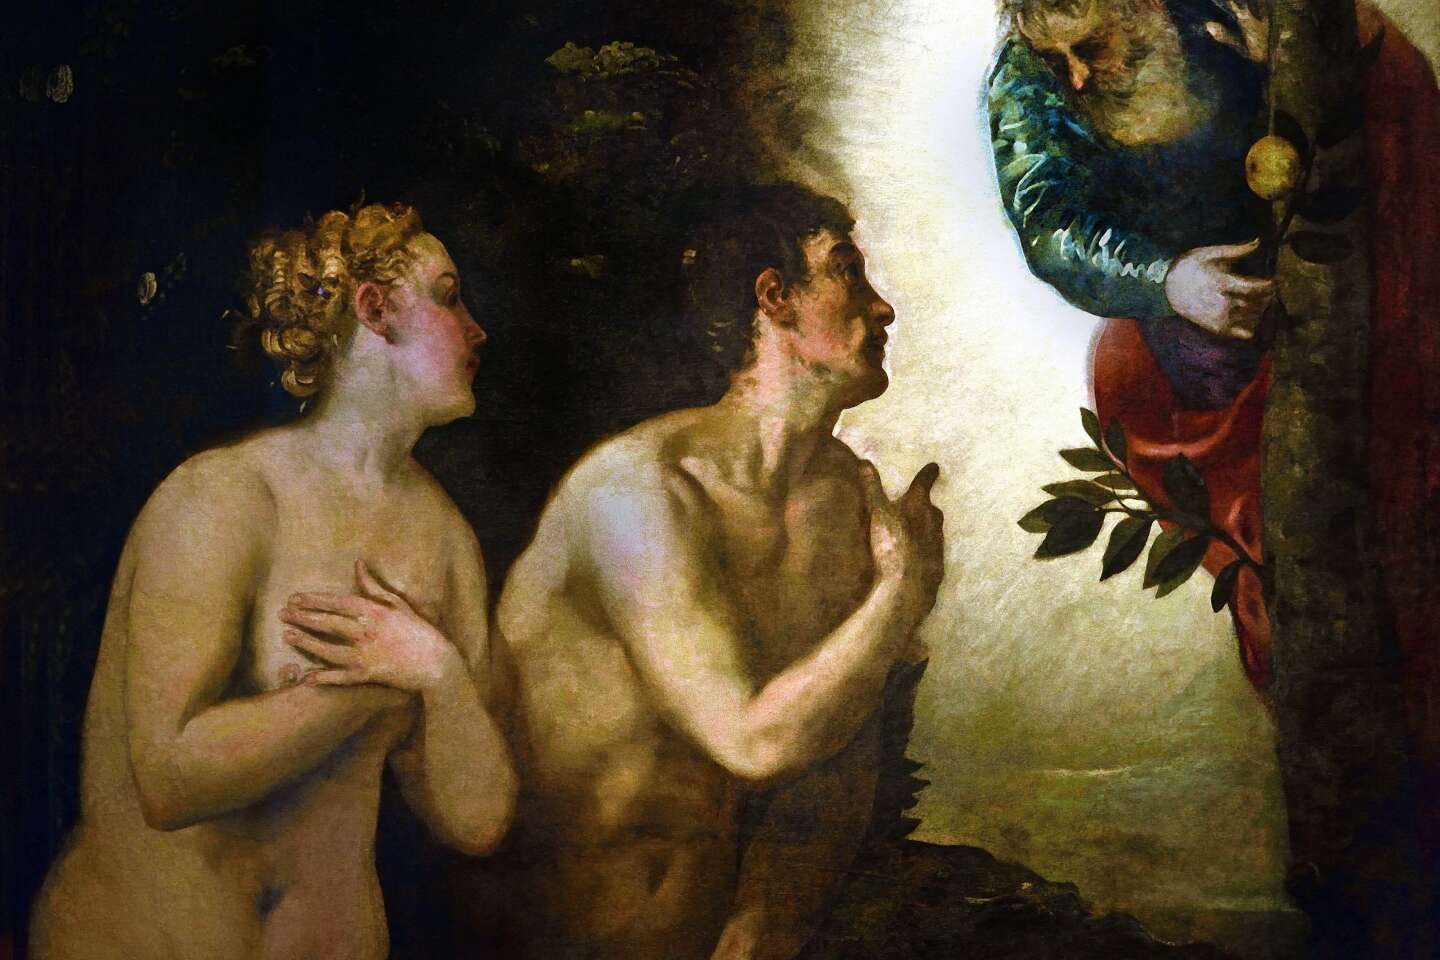 The story of Adam and Eve, and how nudity became shameful picture